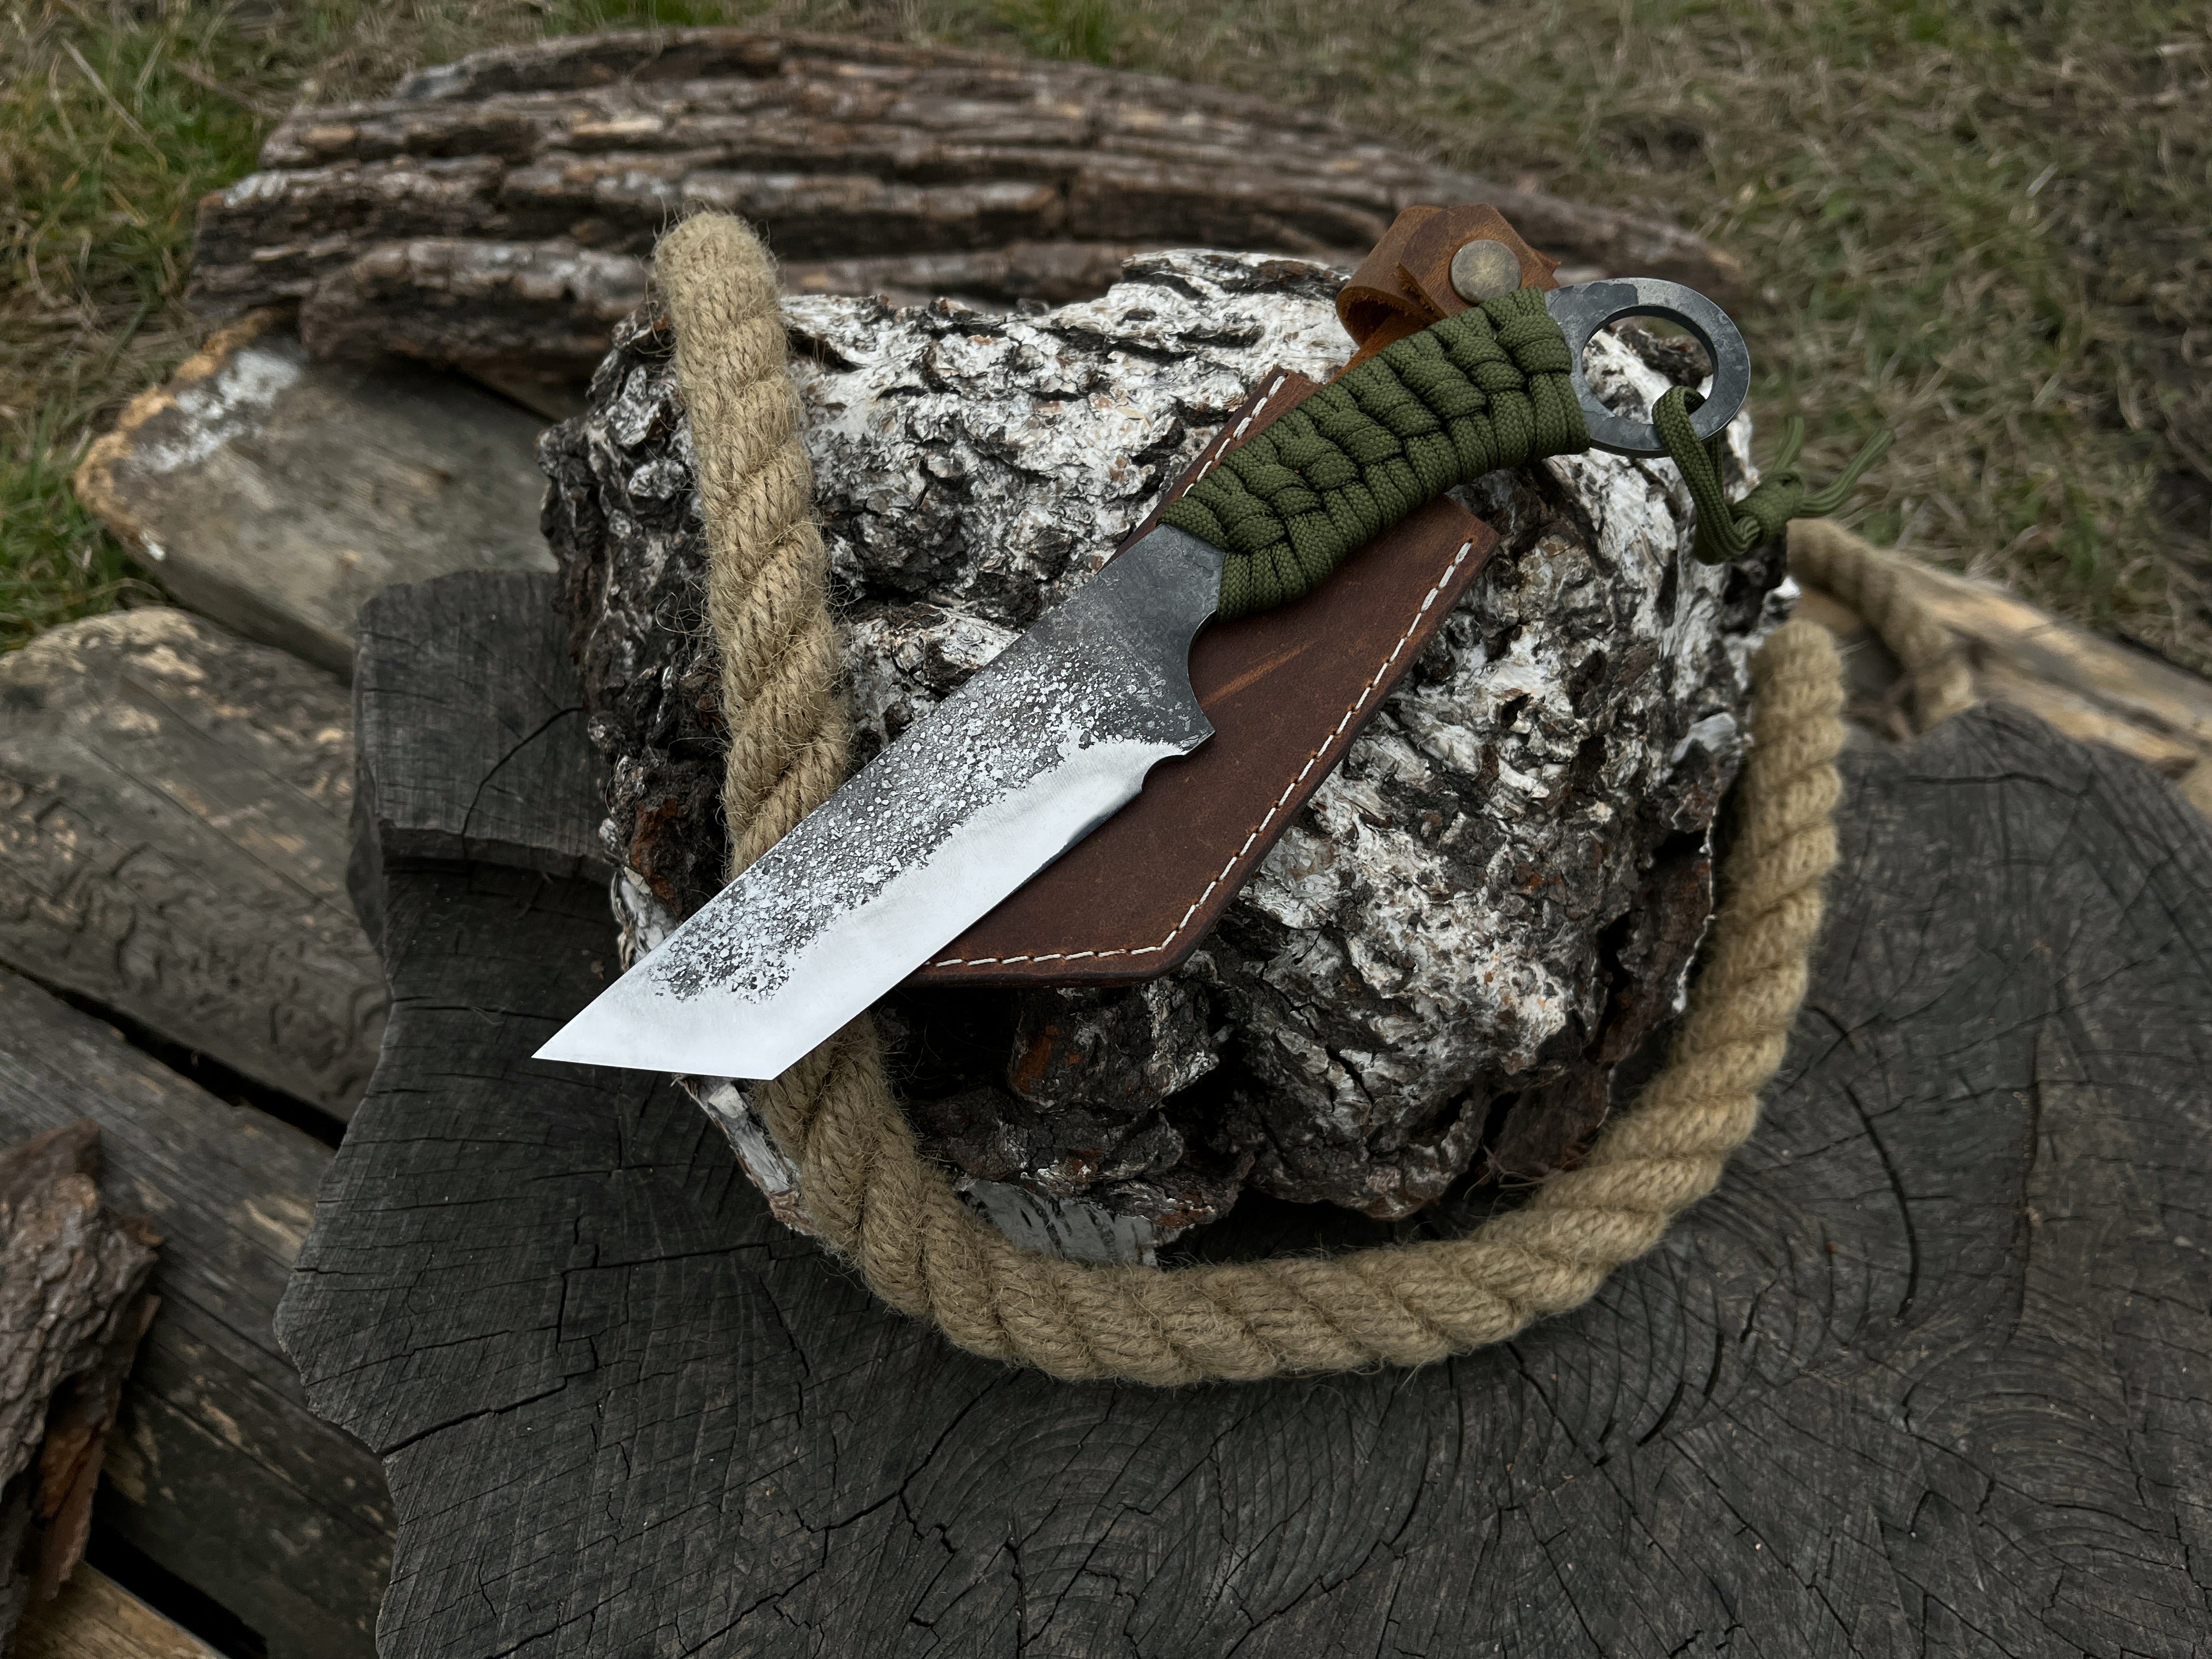 Hand-Forged Throwing Knife, Total Length - 23 cm (9 inches)